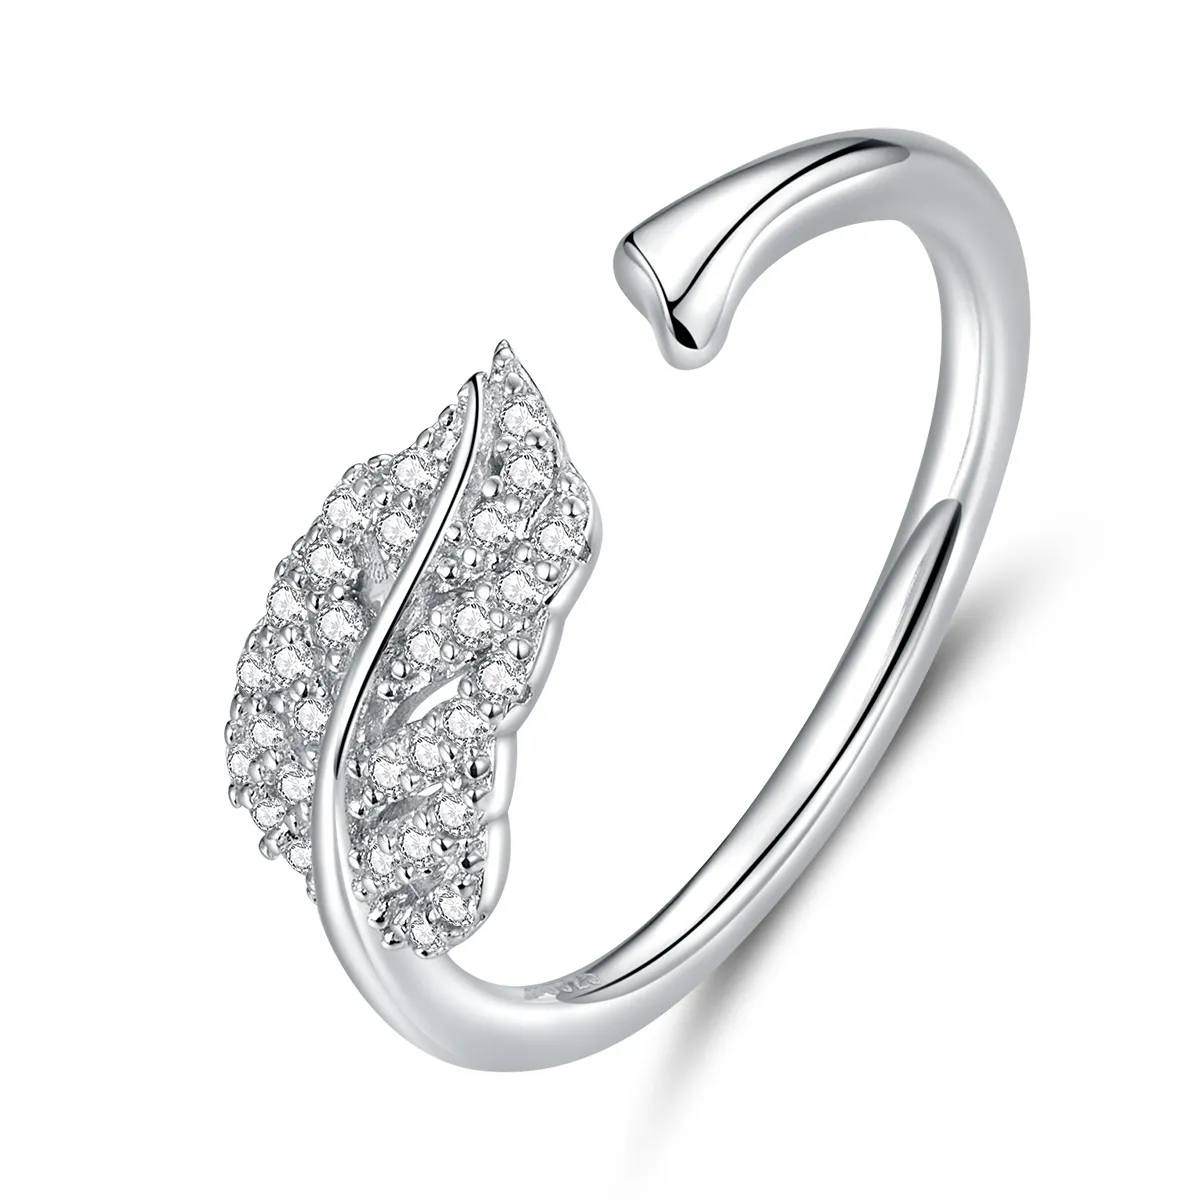 Pandora Style Silver Feather Open Ring - SCR614